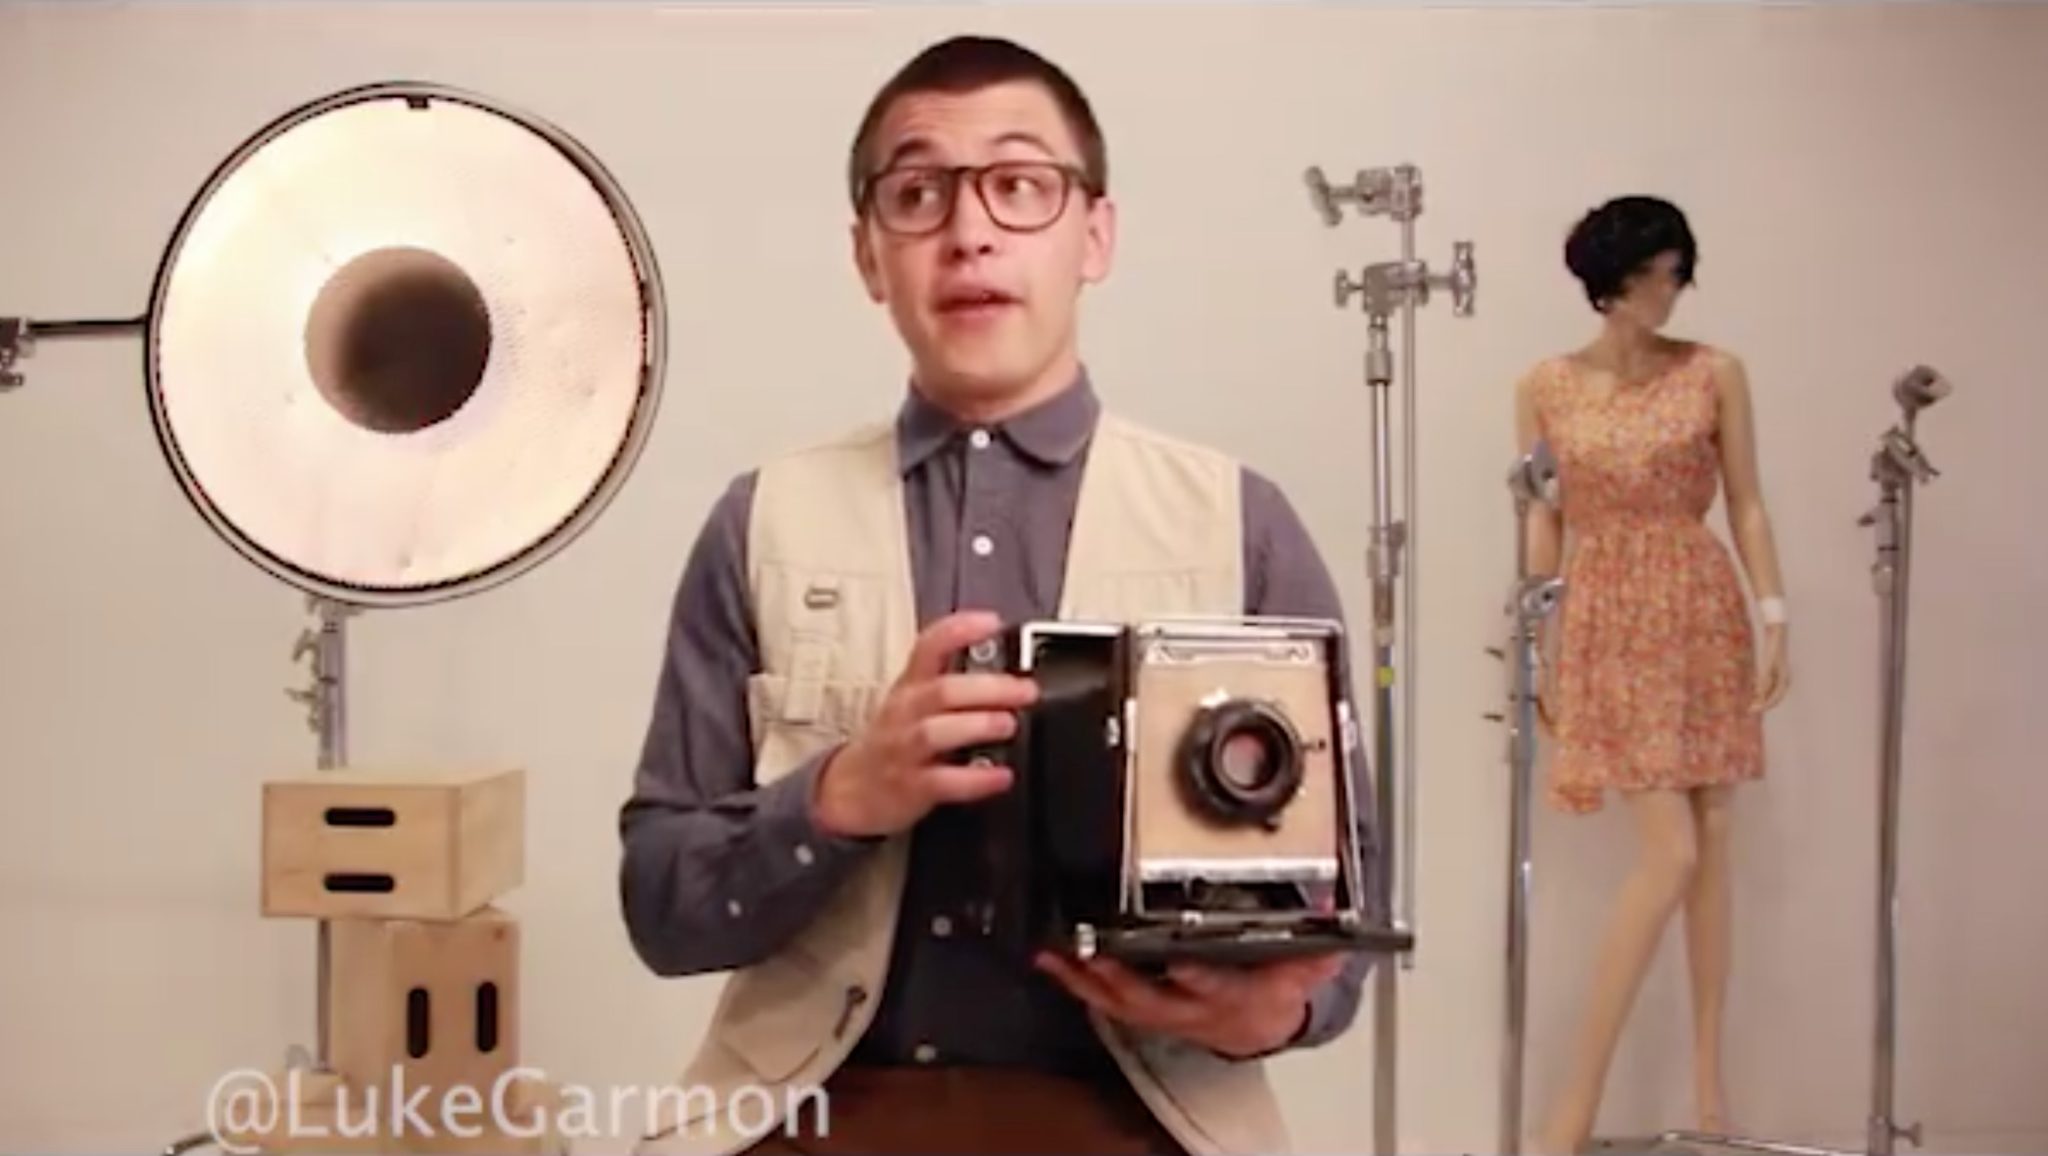 Luke Garmon Hilariously Lampoons That One Friend Who’s Into Photography